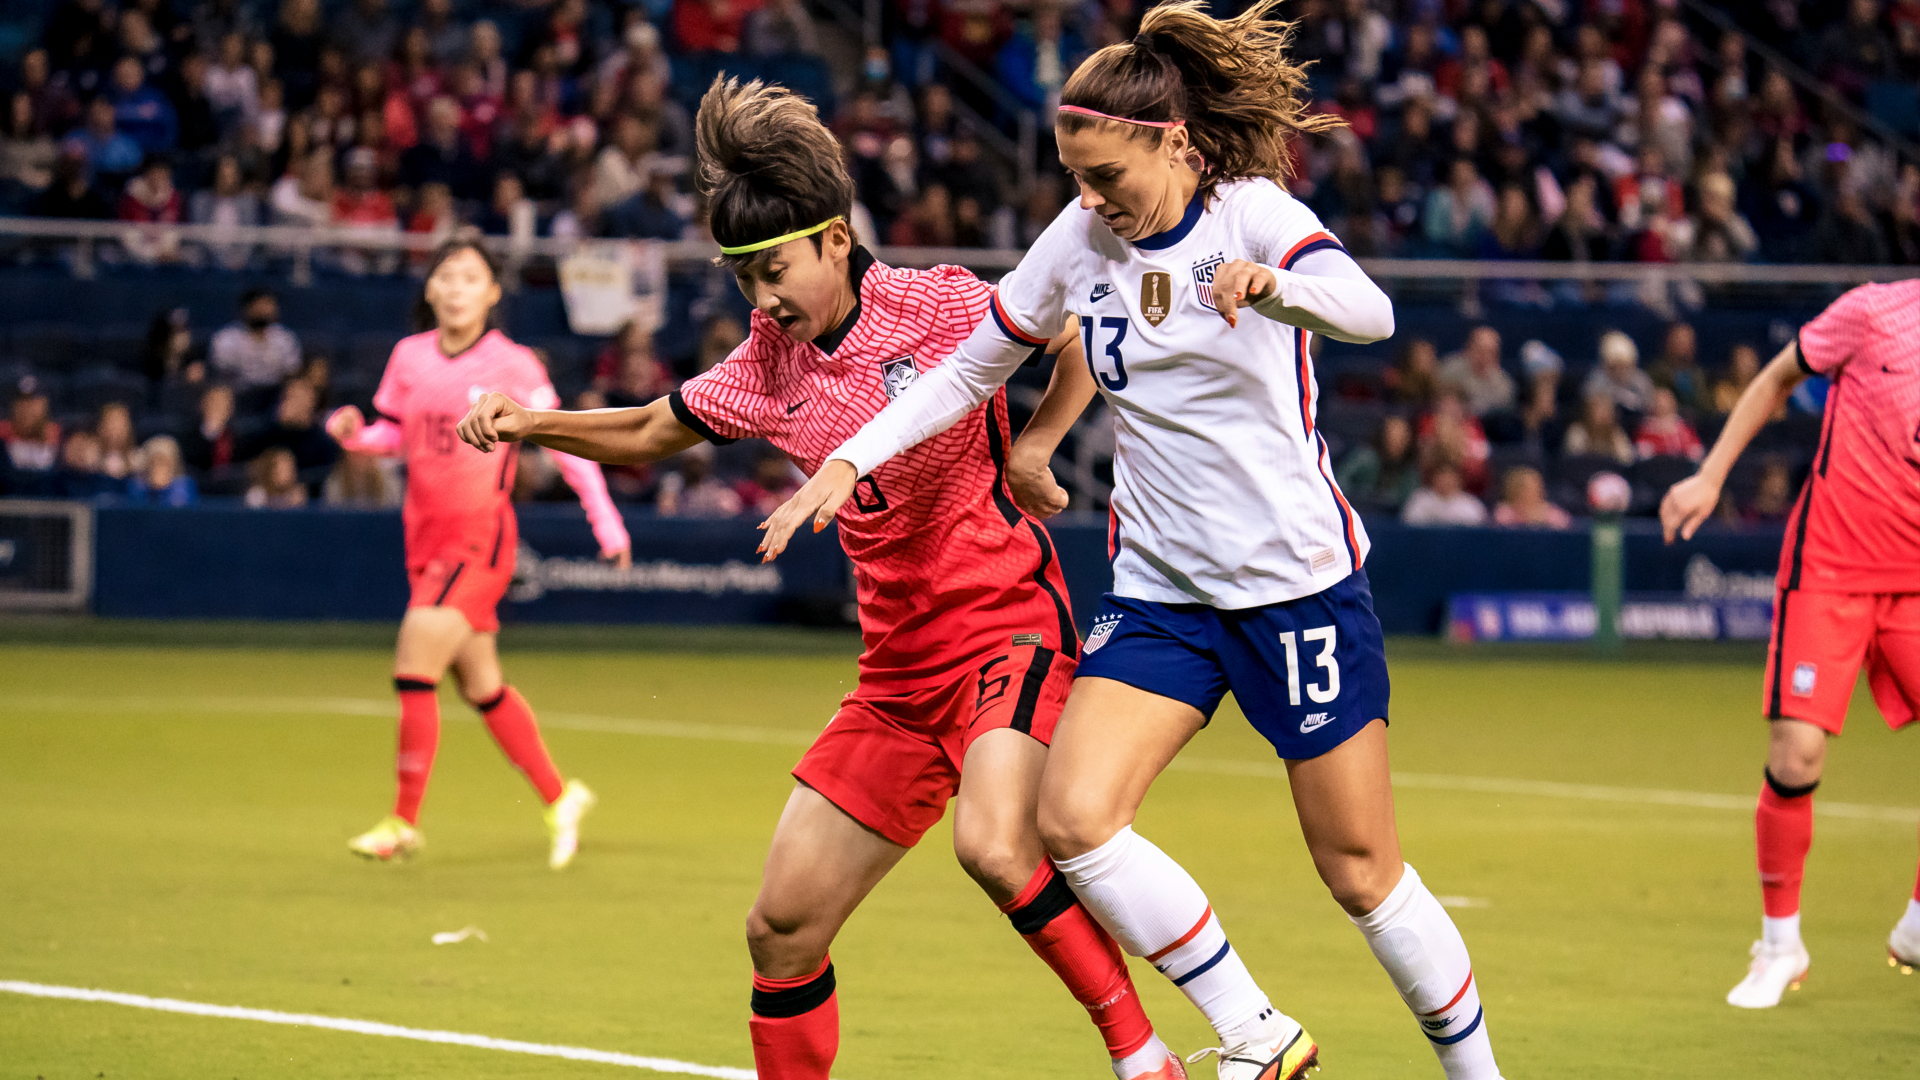 USWNT sees 22-game home win streak snapped in South Korea stalemate